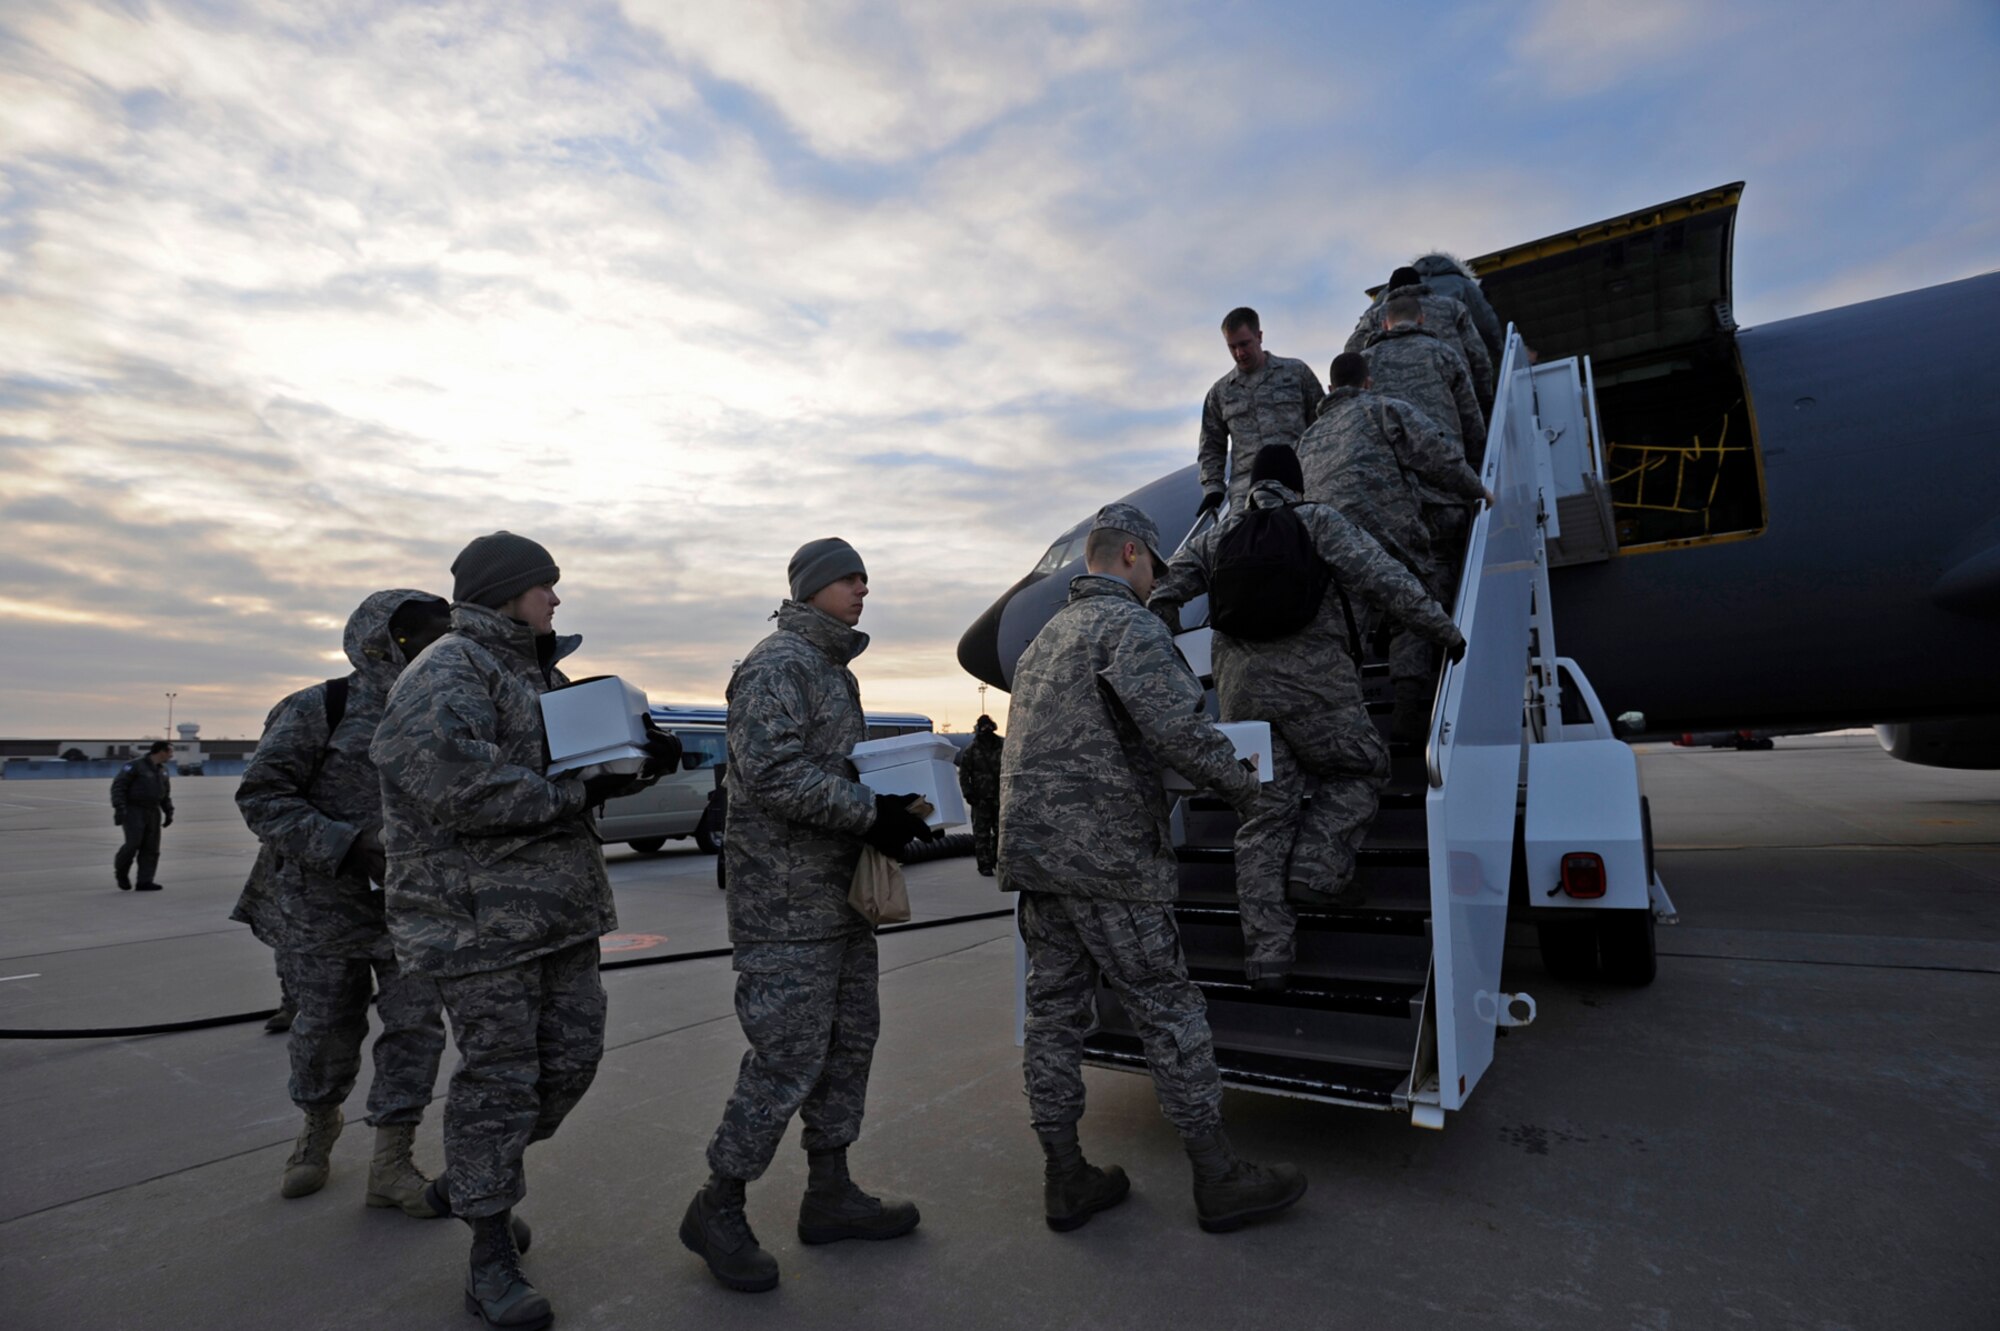 Some of the newest active-duty Airmen at McConnell Air Force Base, Kan., board a KC-135 Stratotanker on the base flightline in the cold, early morning of Jan. 10. They later watched another KC-135 from McConnell receive fuel from the tanker while in flight. Crews from the 931st Air Refueling Group, an Air Force Reserve unit at McConnell, flew both aircraft. (U.S. Air Force photo/Tech. Sgt. Jason Schaap)